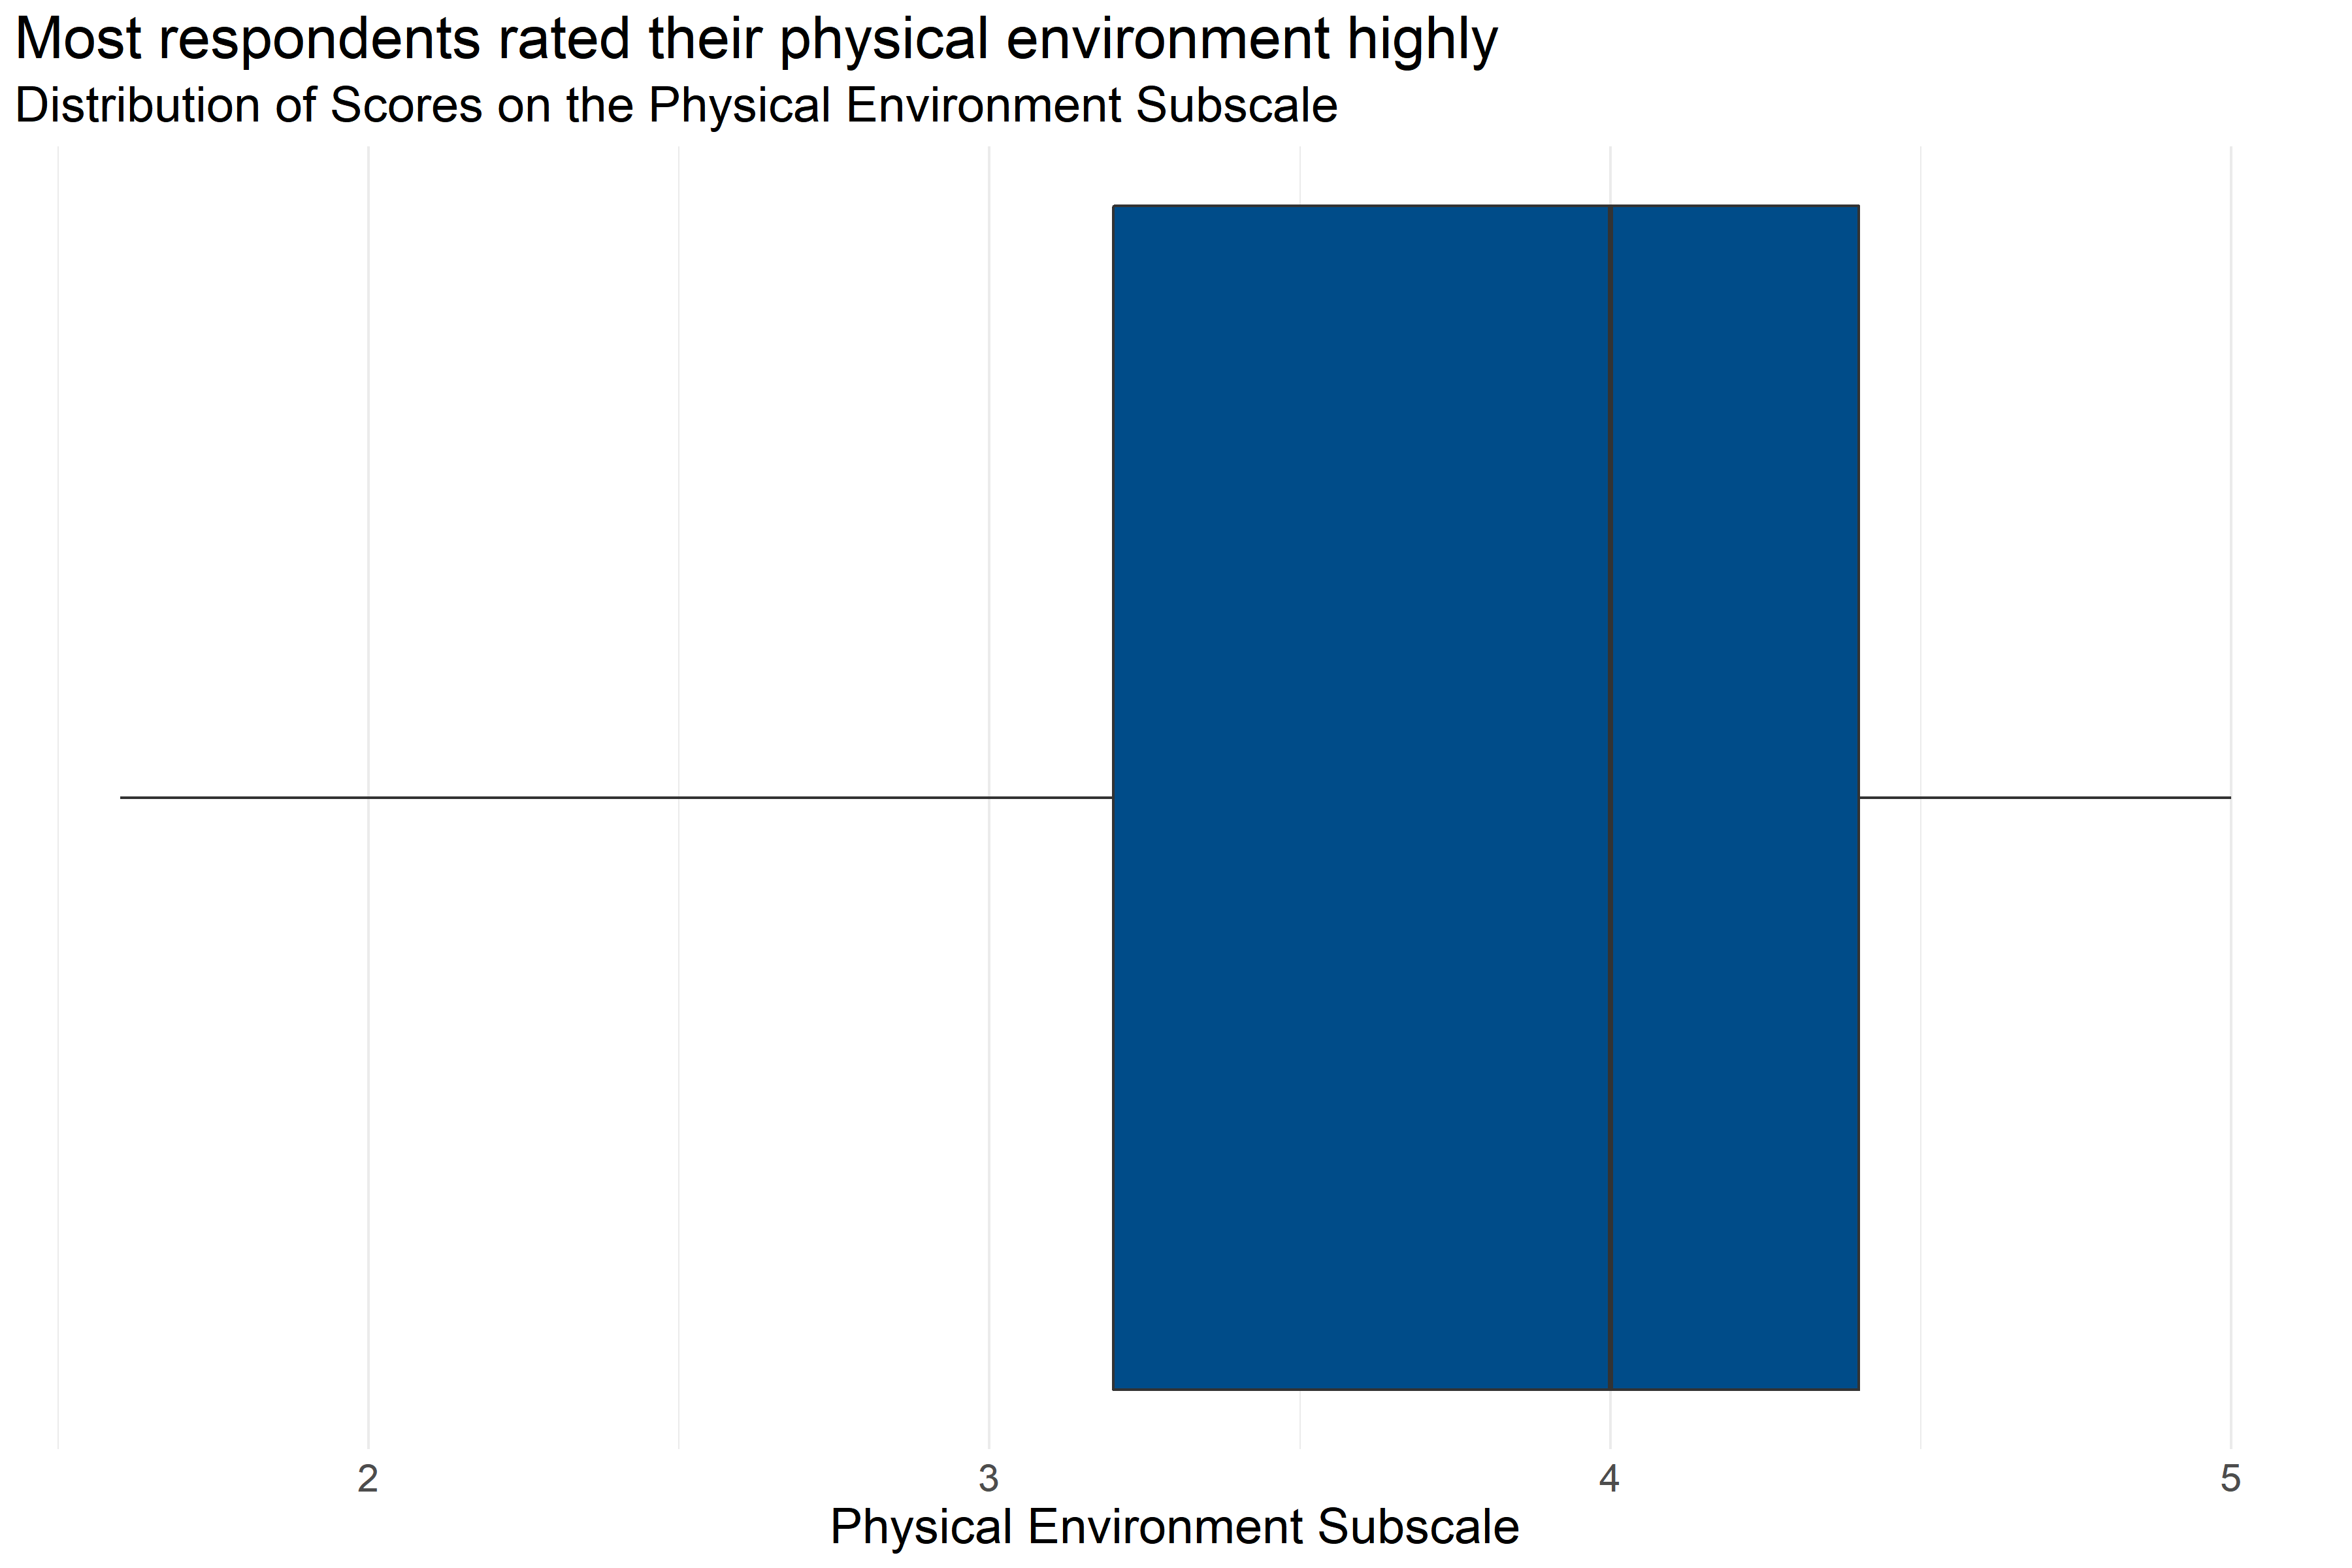 Boxplot of score distributions for the Physical Environment Subscale